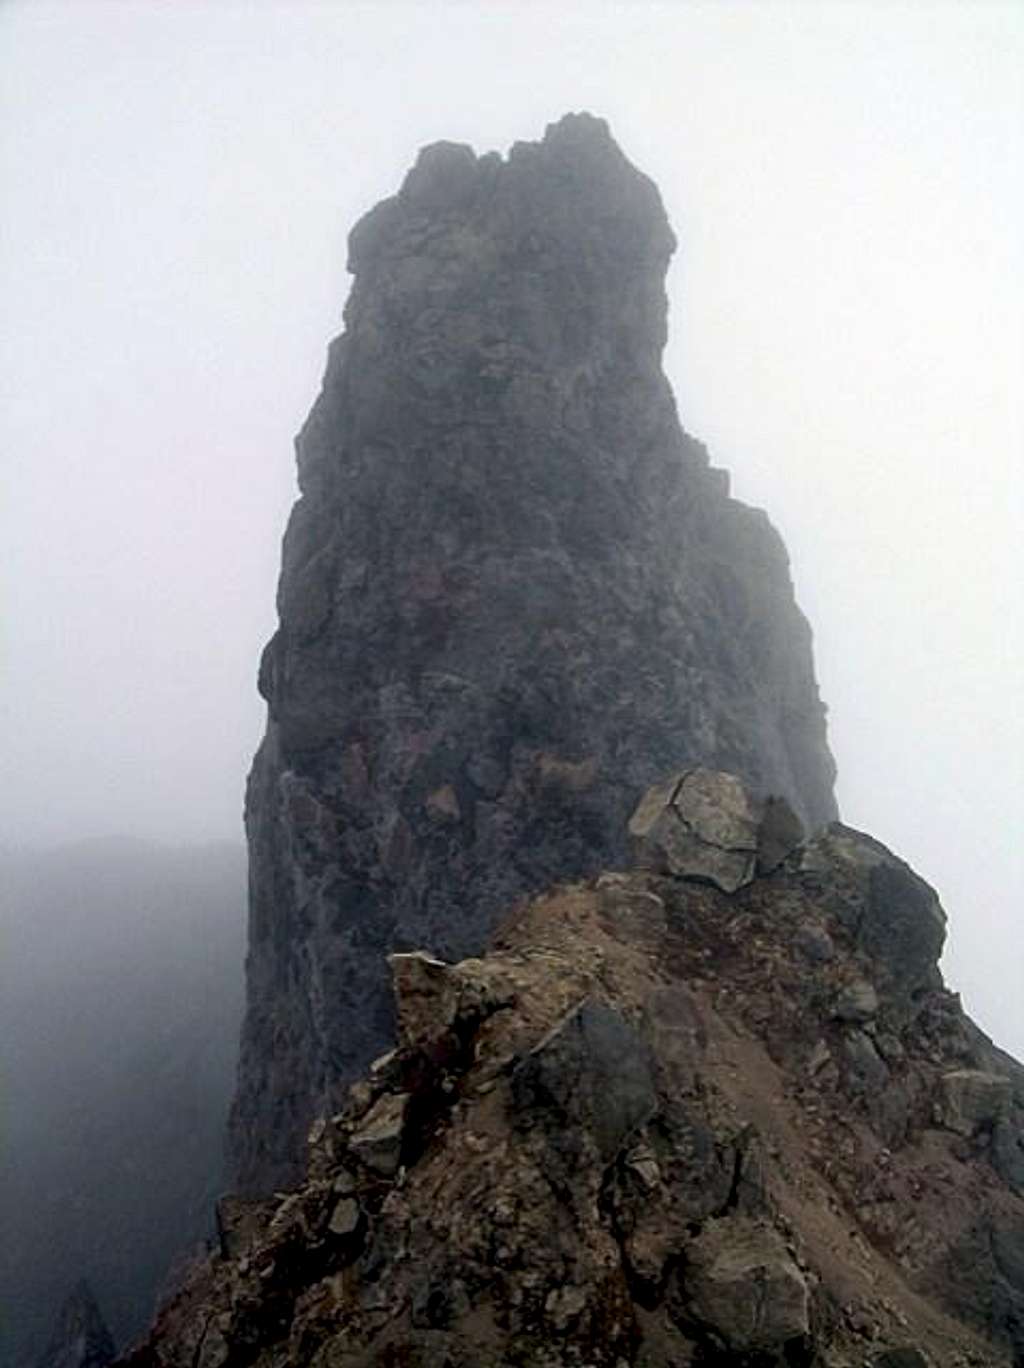 The summit tower. 24 Feb 2005